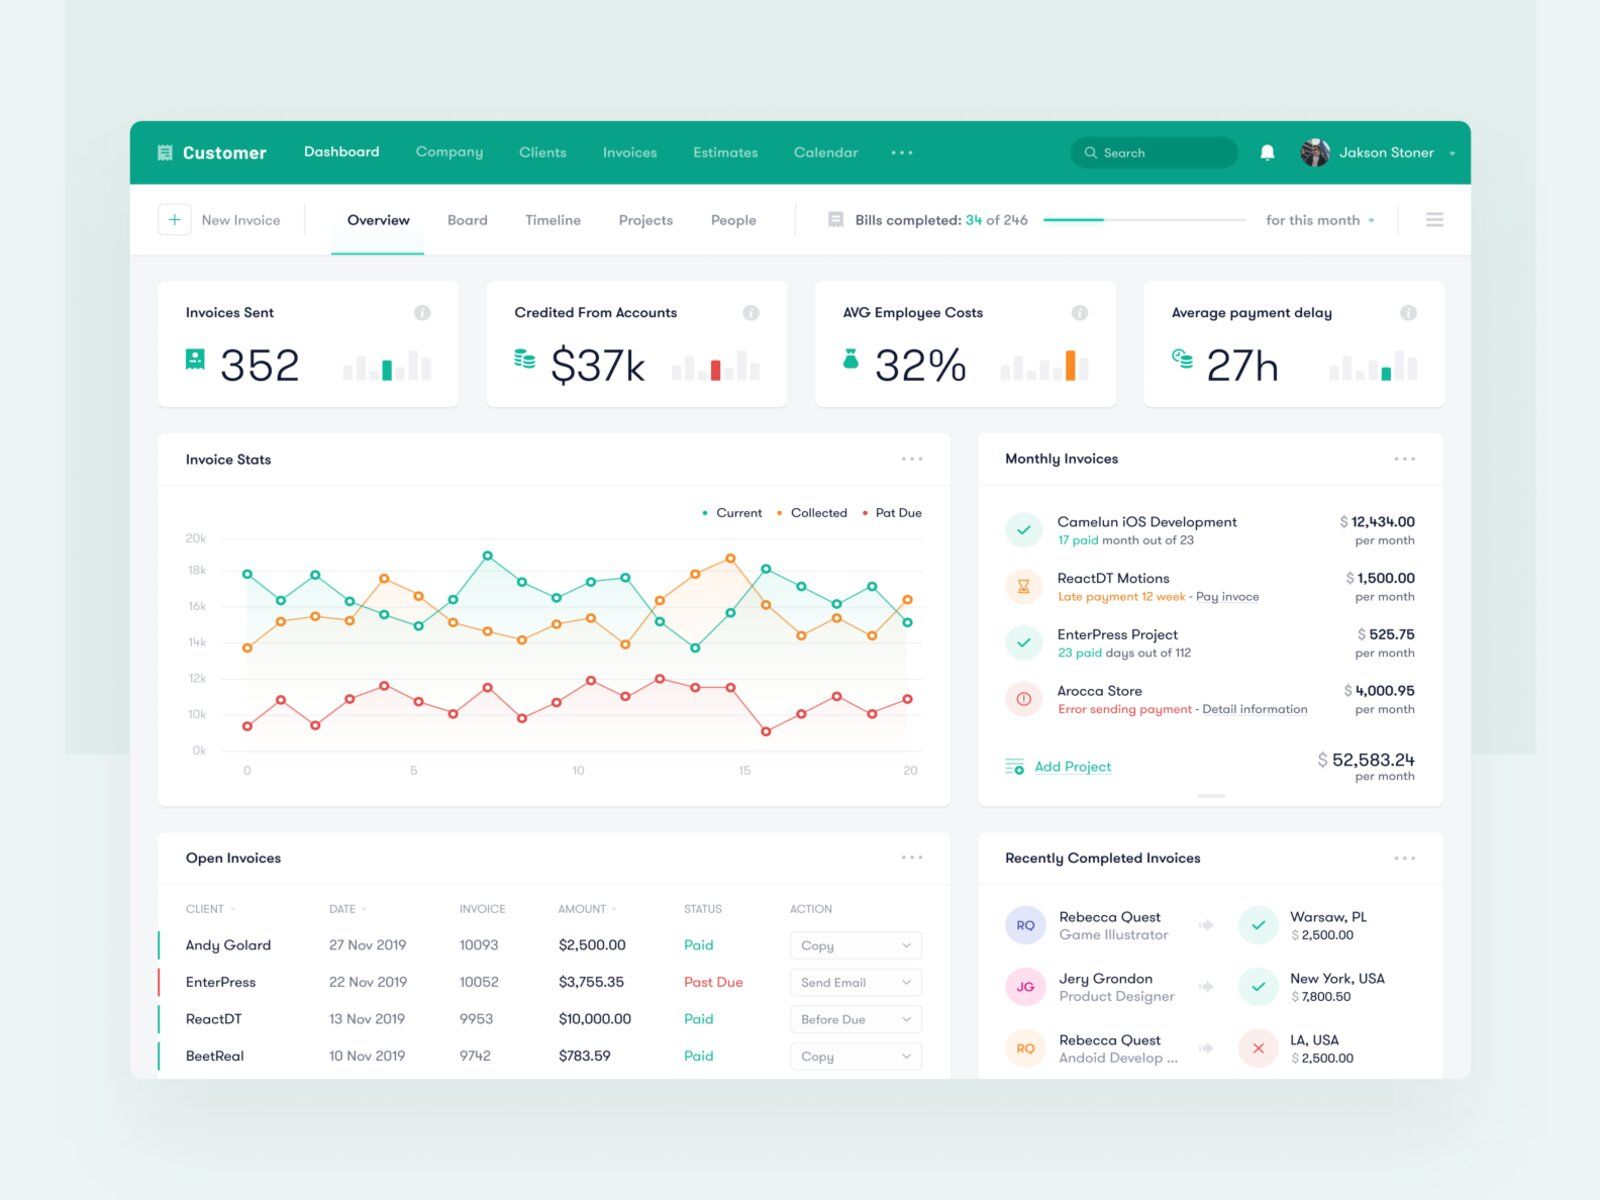 Availability of a mobile banking app opens up new possibilities when it comes to customer analysis since it’s easier to work with big data (*image by [Toglas Studio](https://dribbble.com/toglas){ rel="nofollow" .default-md}*)